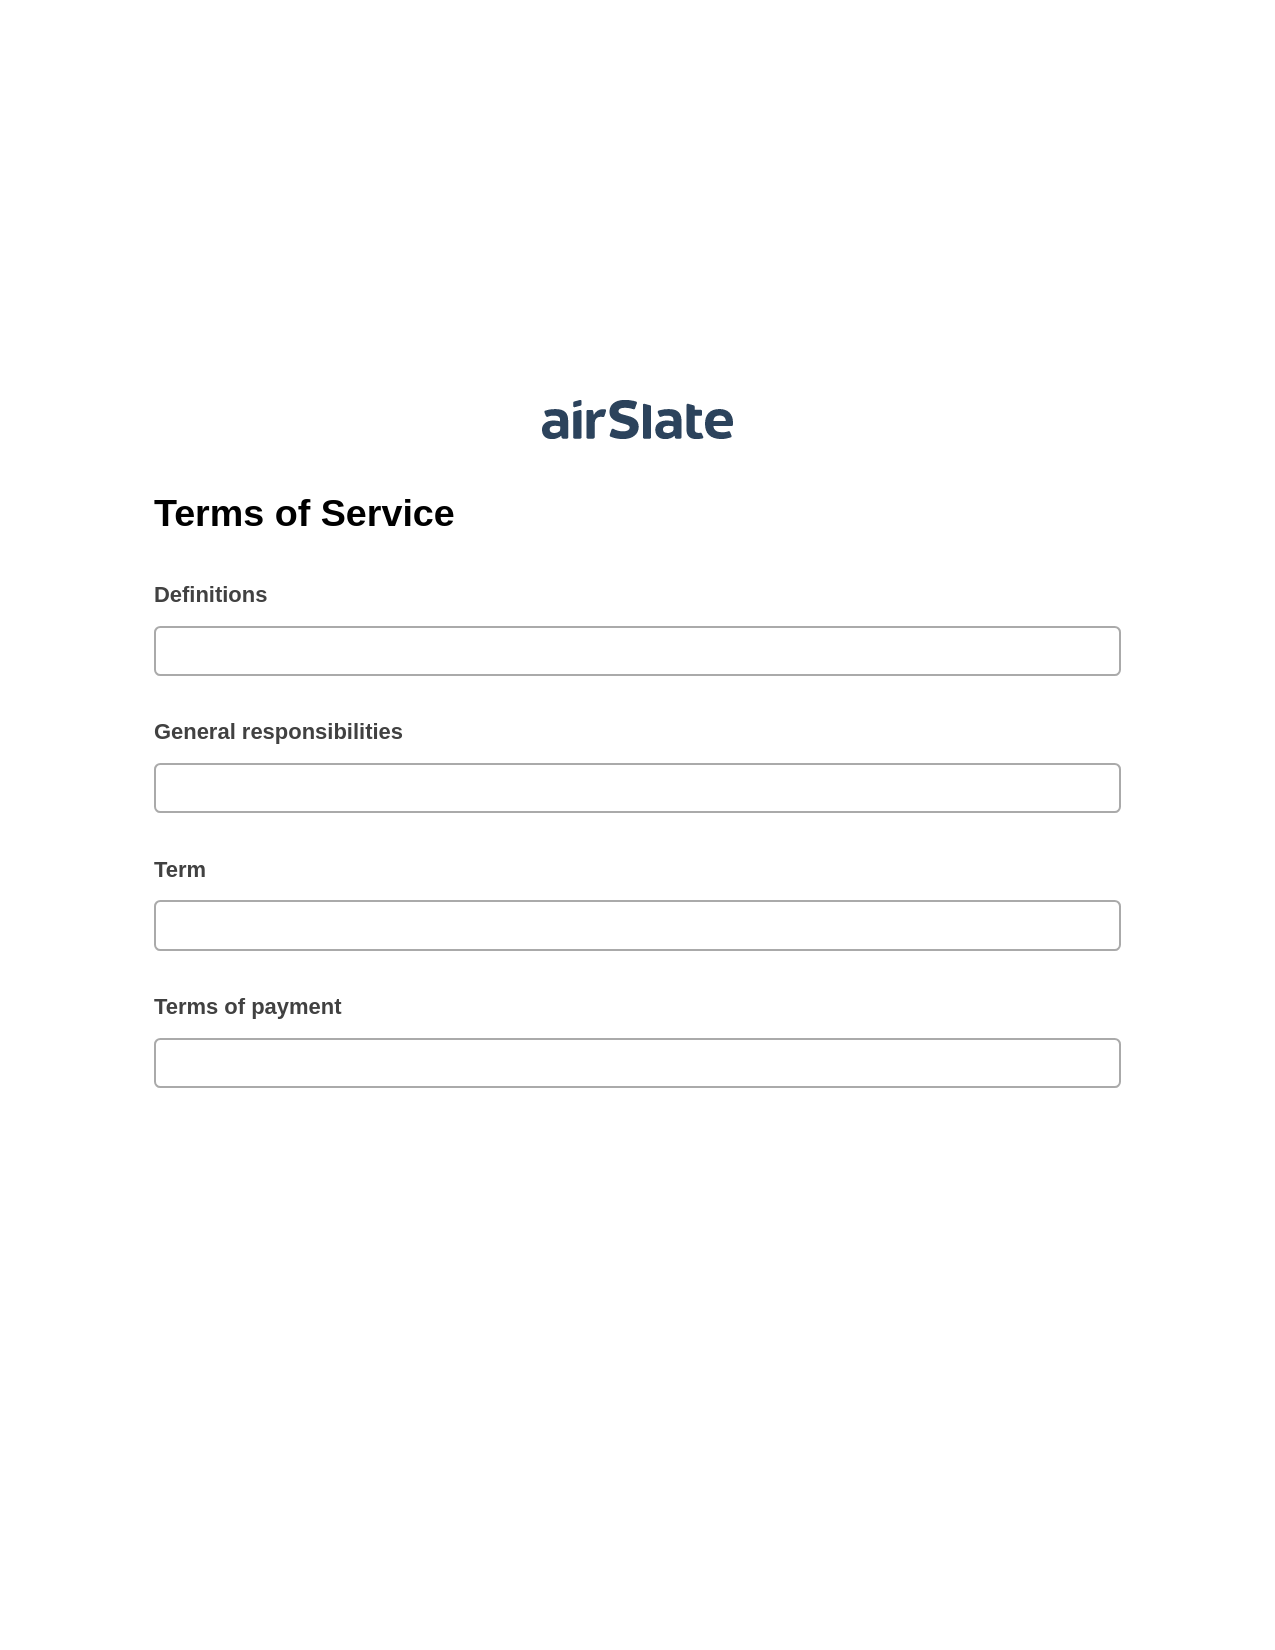 Multirole Terms of Service Pre-fill from CSV File Bot, Remove Slate Bot, Export to Smartsheet